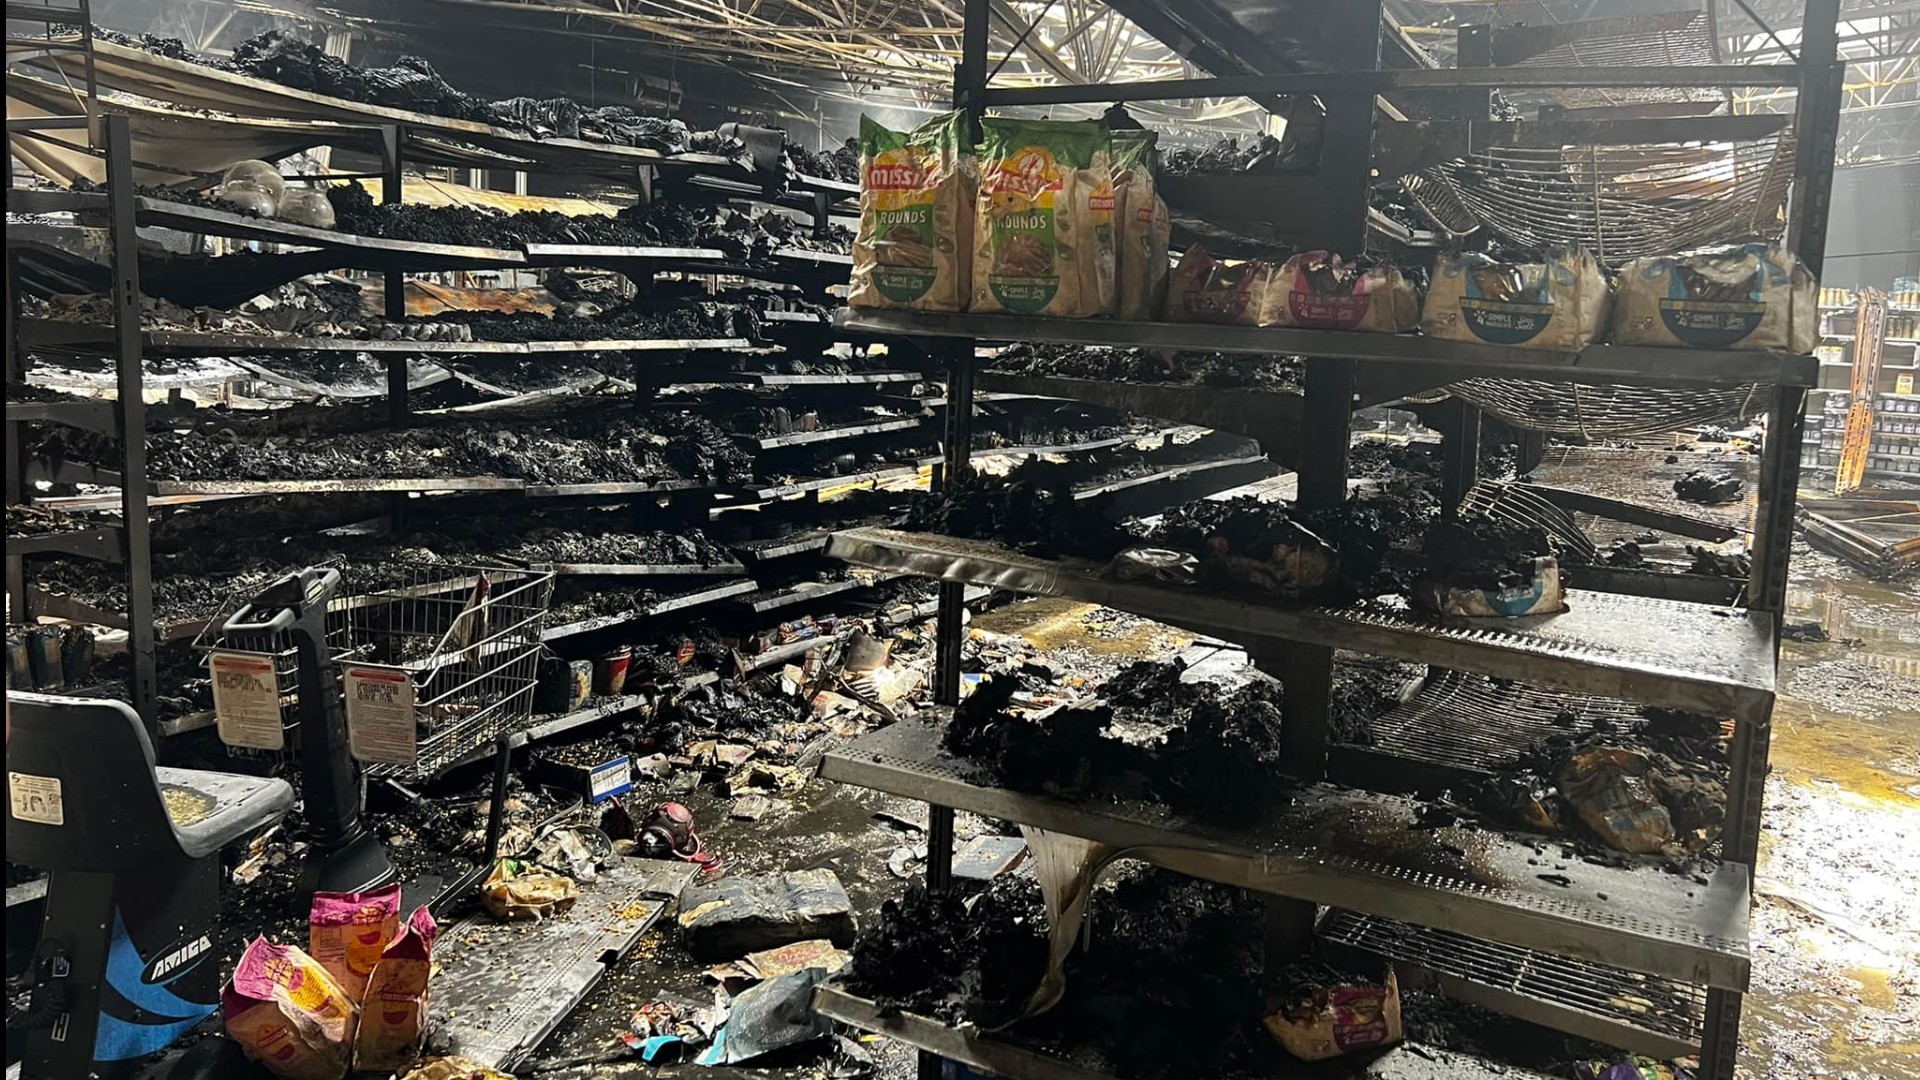 The Walmart in Peachtree City will be "closed temporarily until further notice," according to the store after a fire ripped through the building Wednesday night.